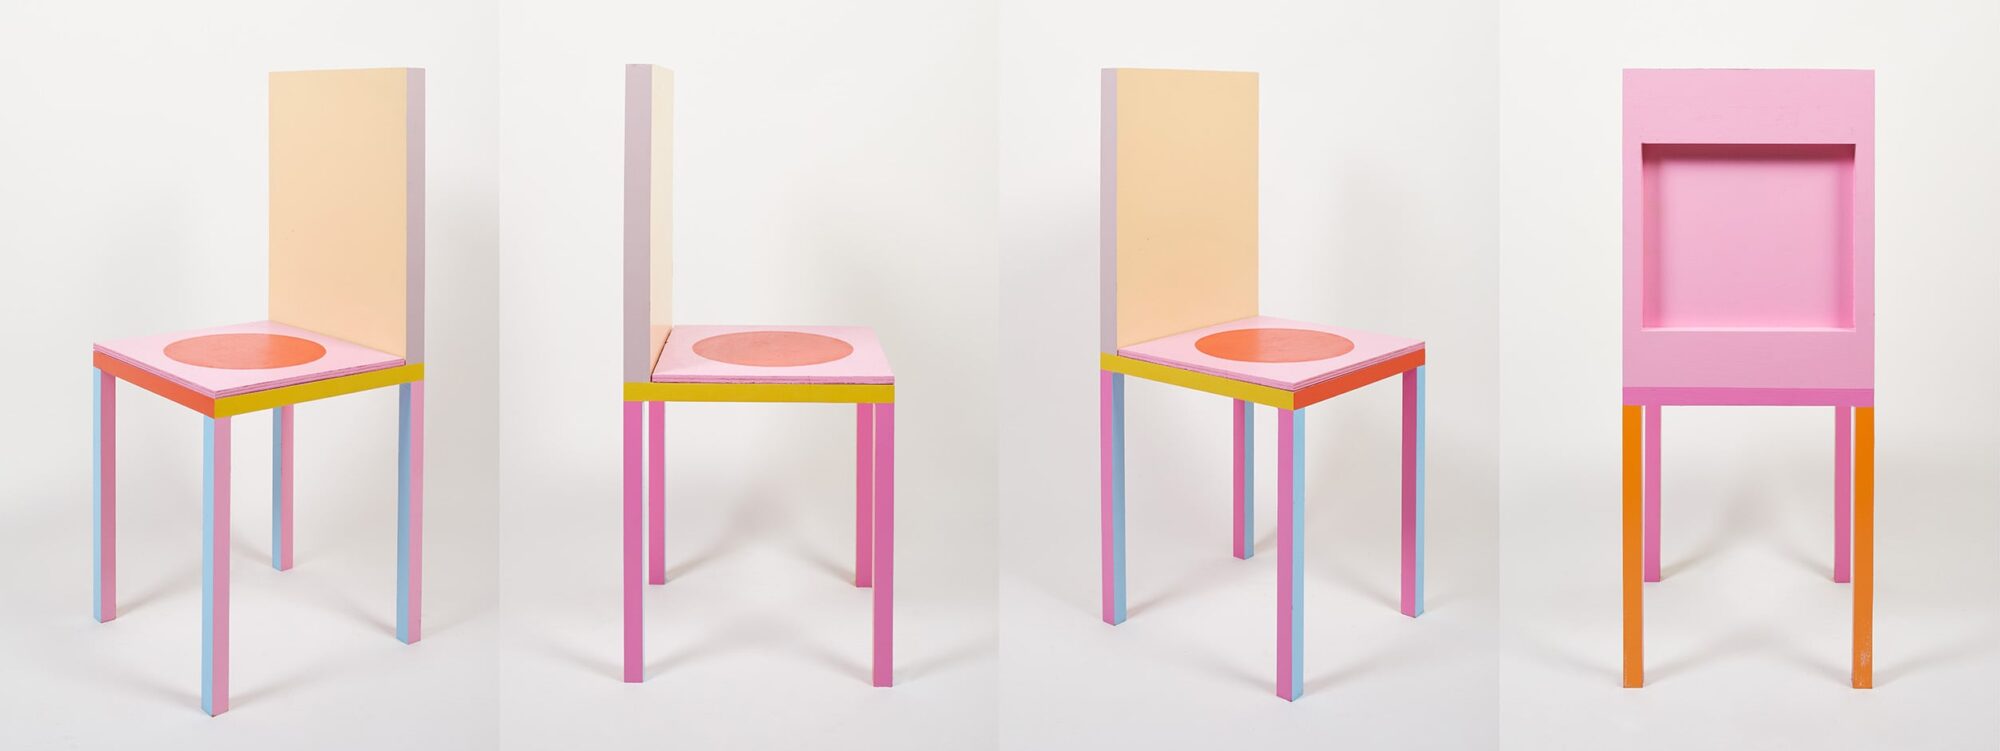 Yinka Ilori's 'Types of Happiness Chair' photographed from four different perspectives